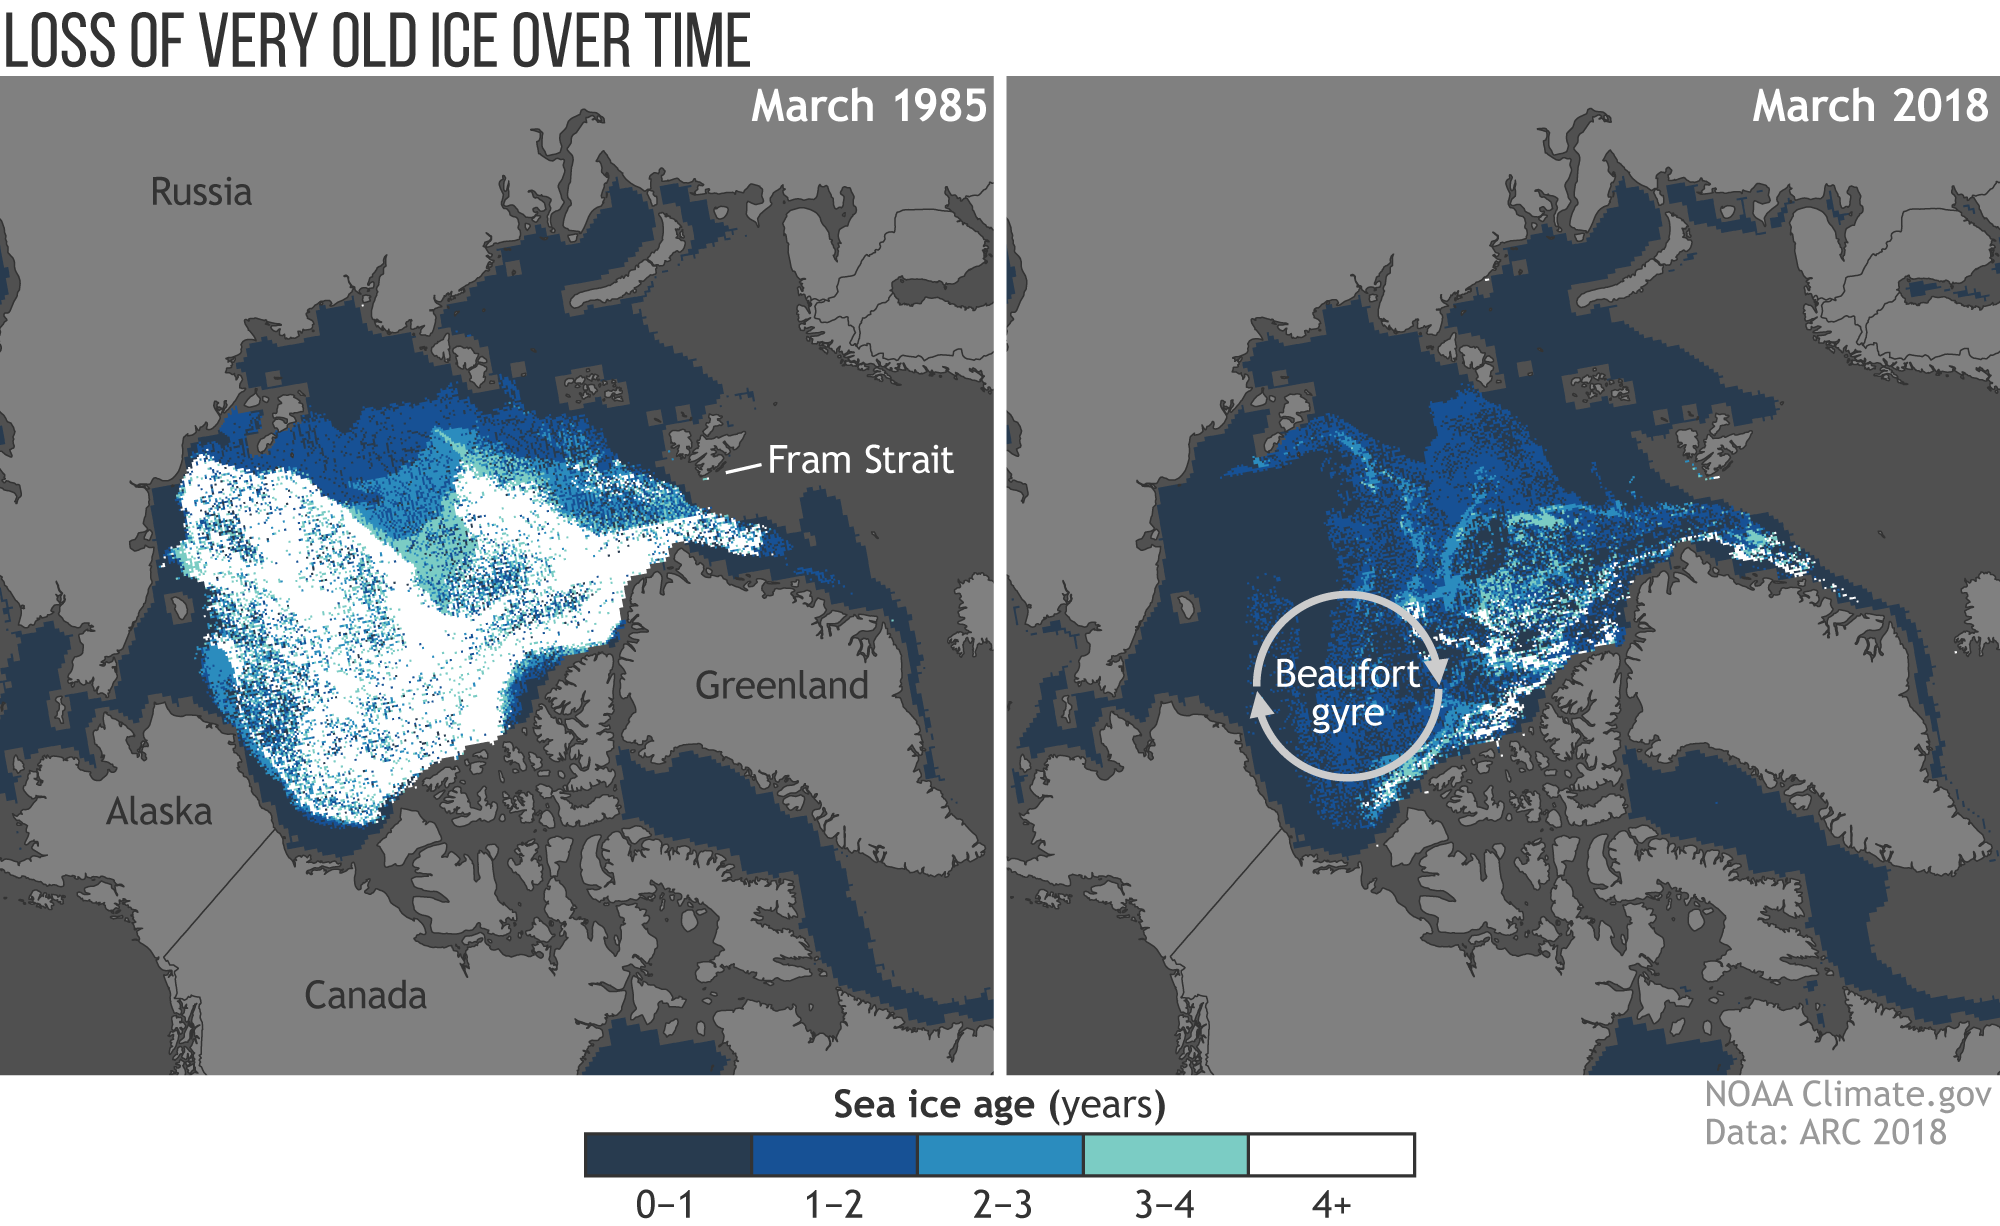 Declining Arctic sea ice: The 2018 Arctic Report Card found the Arctic region had the second-lowest overall sea-ice coverage on record. The map shows the age of sea ice in the Arctic ice pack in March 1985 (left) and March 2018 (right). Ice that is less than a year old is darkest blue. Ice that has survived at least 4 full years is white. Maps were provided by NOAA Climate.gov and based on data provided by Mark Tschudi./University of Colorado/CCAR.